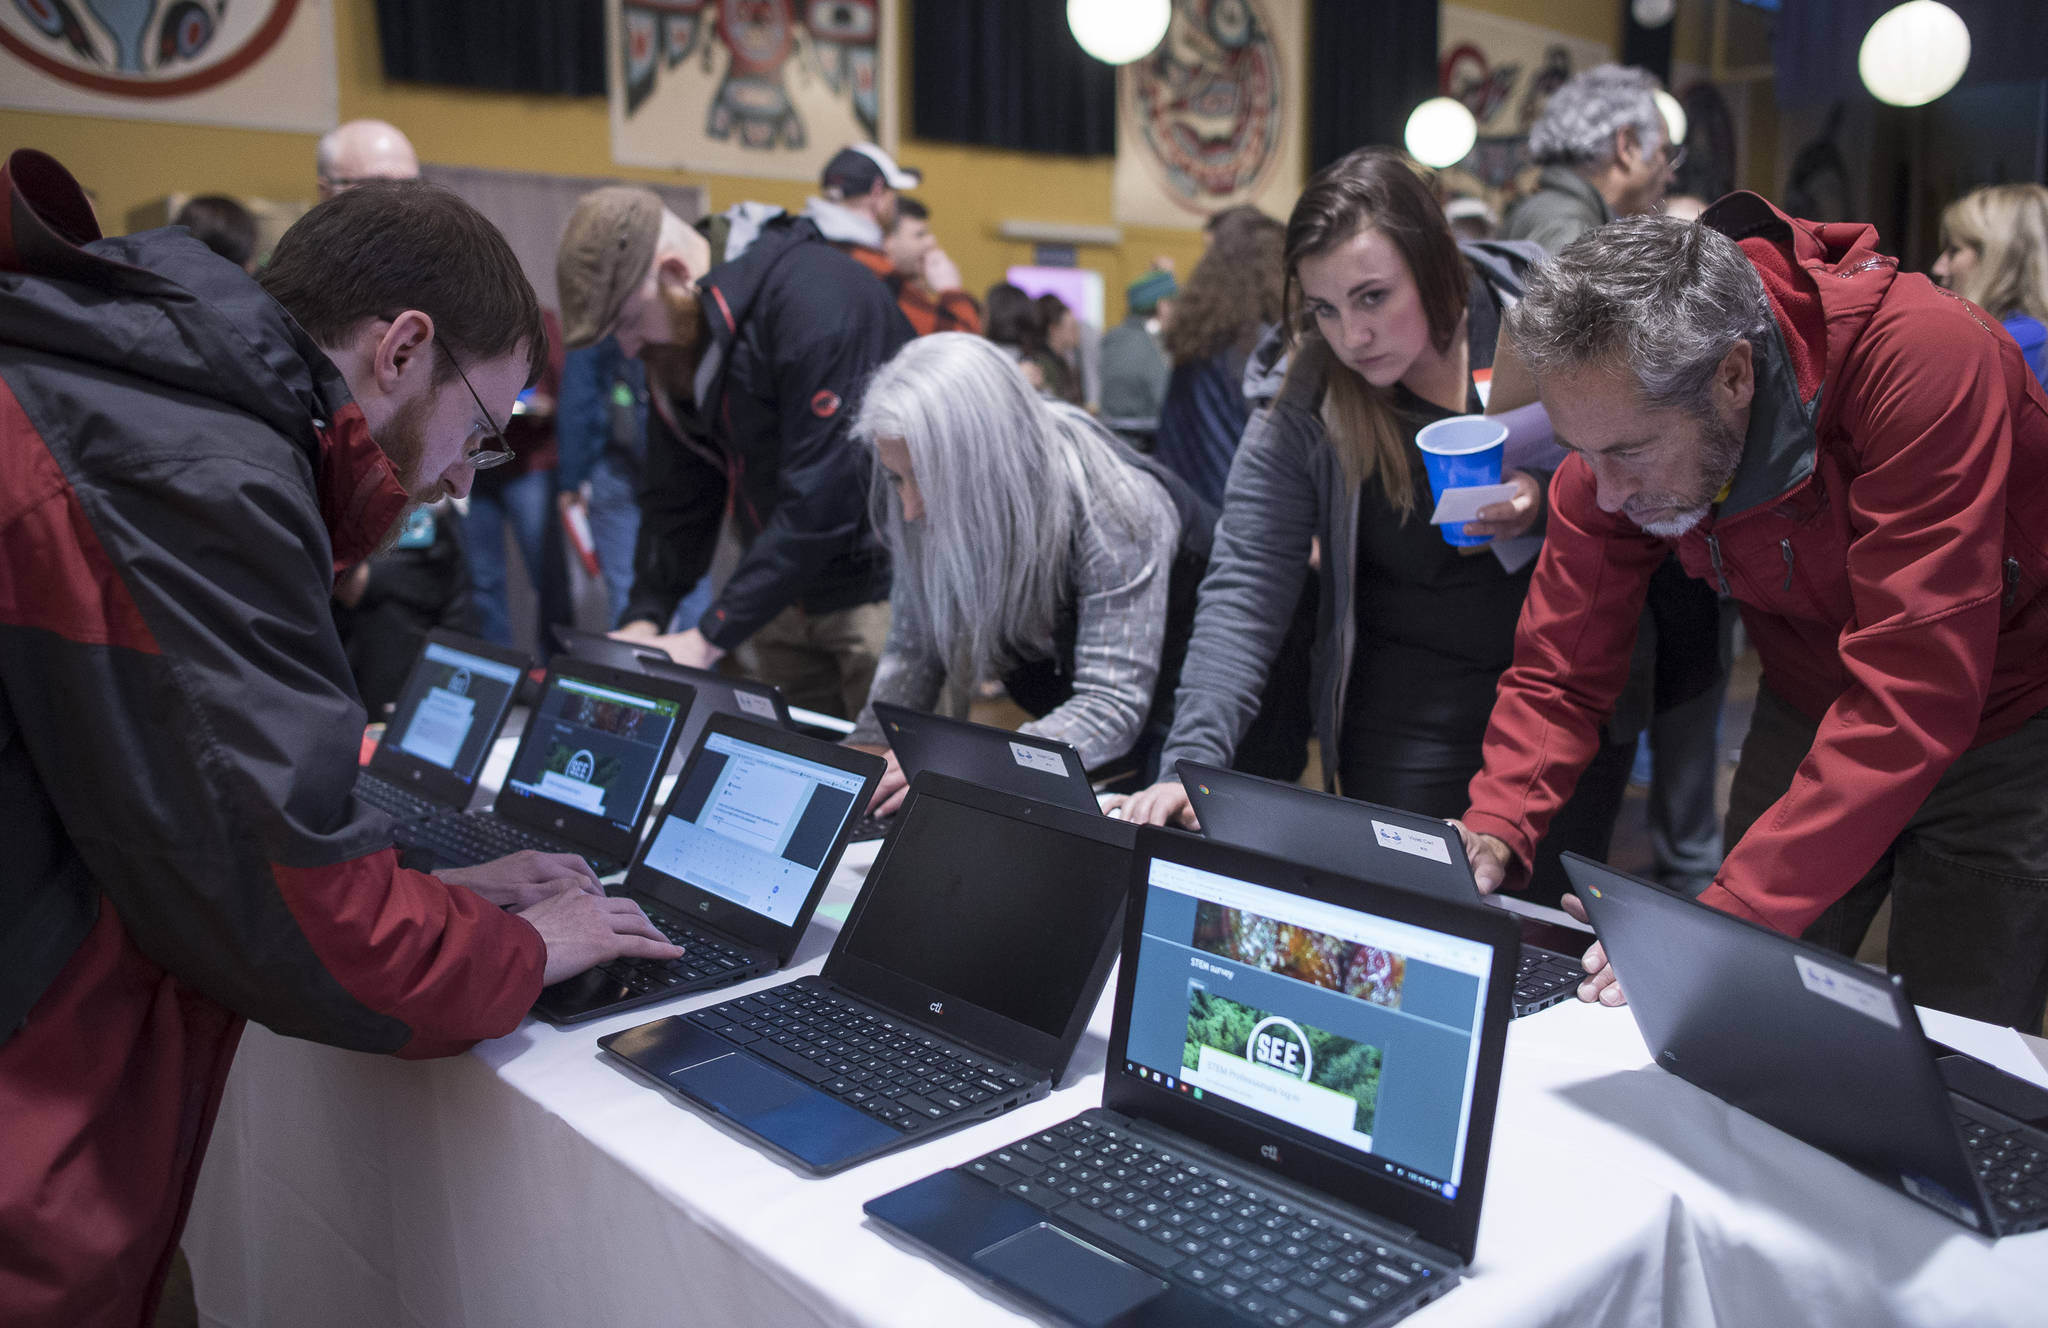 Juneau residents fill out a computer survey during a networking event for teachers and STEM community members at the Juneau Arts and Culture Center on Tuesday, Oct. 17, 2017. The SouthEast Exchange is a new collaboration started by scientists and school teachers, in conjunction with the Juneau STEM Coalition and JEDC. Its broad mission is to share ideas, experience and knowledge within our community and, particularly, to facilitate connections among professionals and teachers to enrich education for Juneau students. (Michael Penn | Juneau Empire)